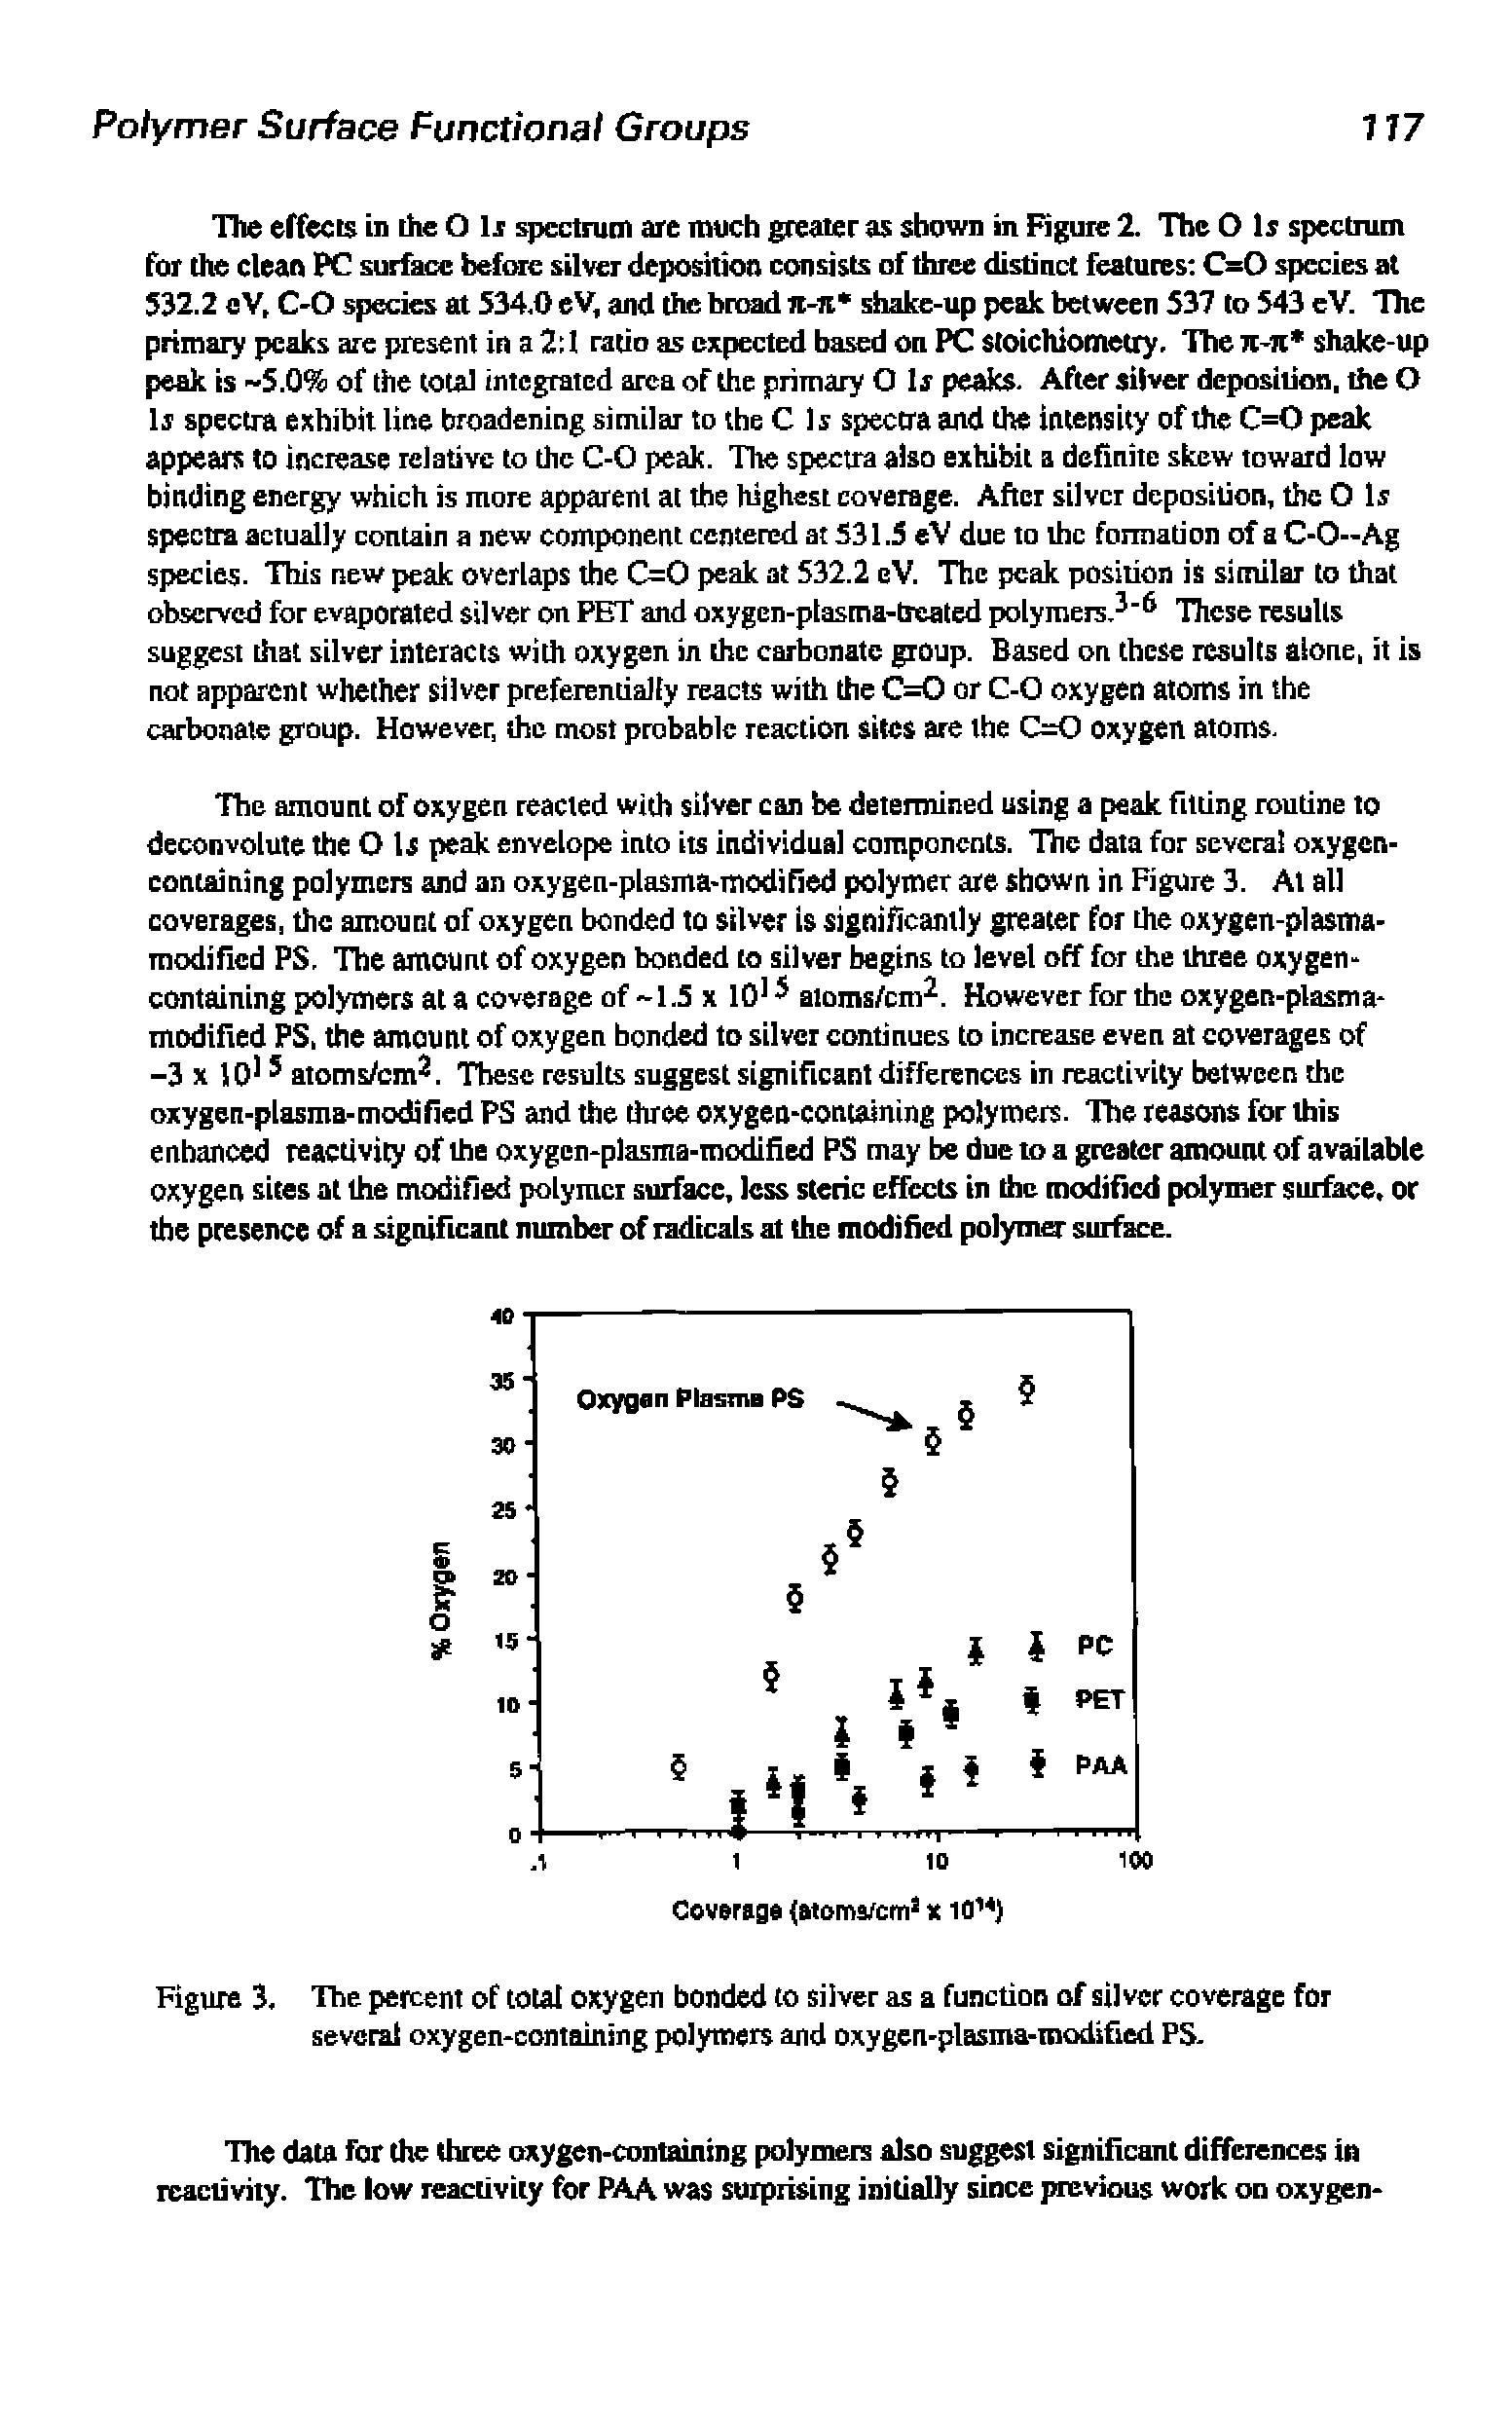 Figure 3. The percent of total oxygen bonded to silver as a function of silver coverage for several oxygen-containing polymers and oxygen-plasma-roocfified PS.